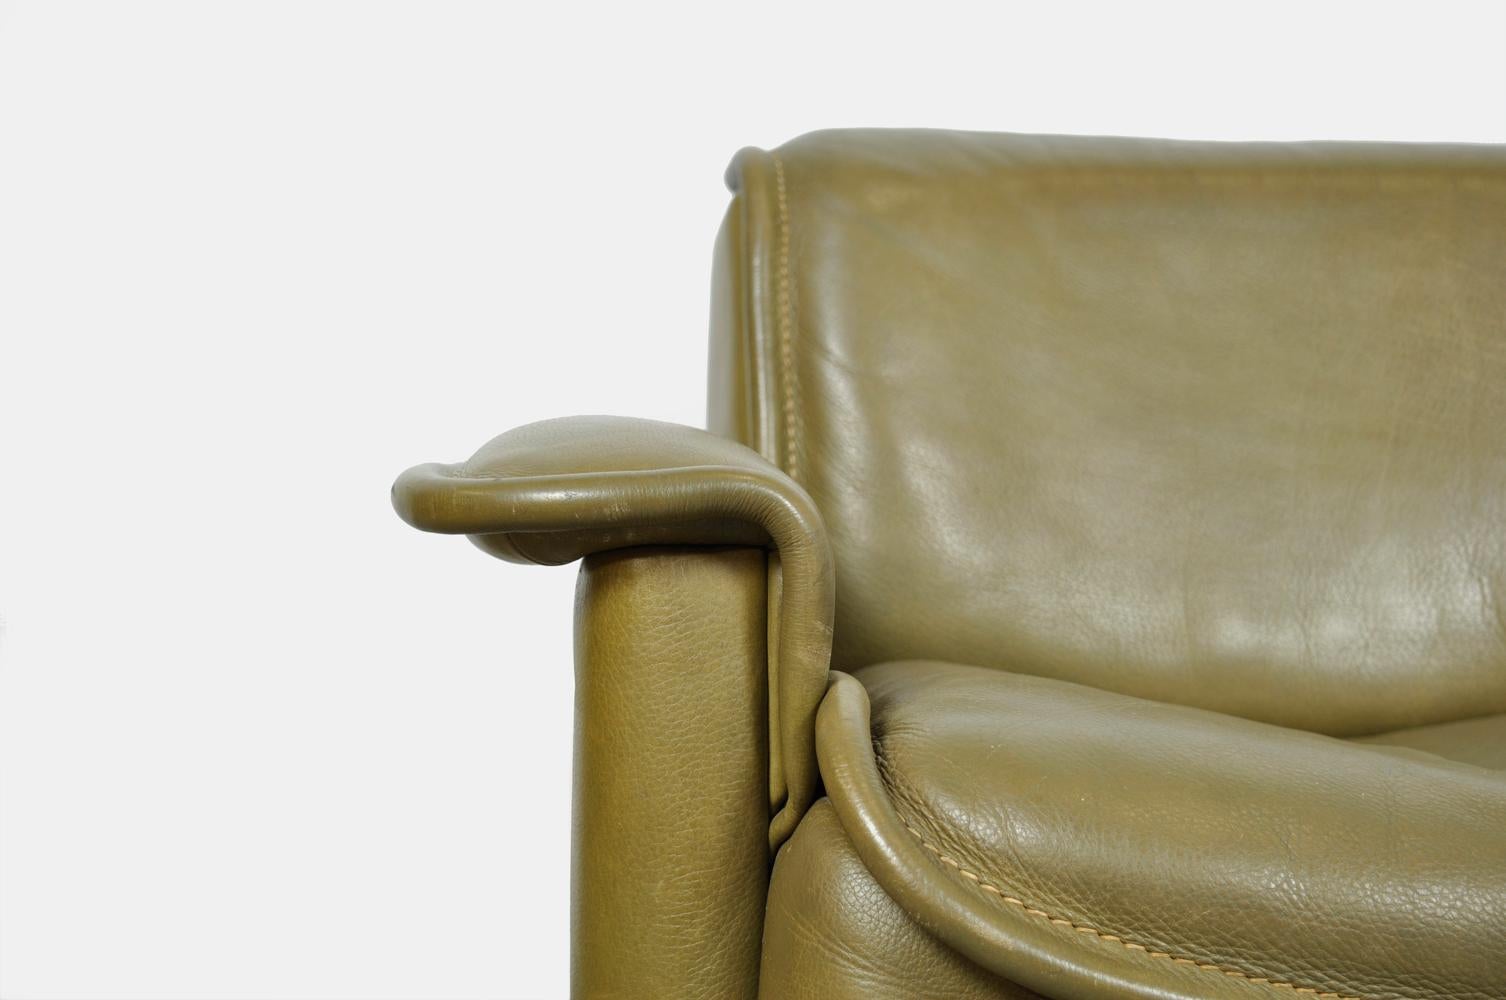 Olive Colored Leather 3-Seater Sofa, Model Ds-12 by De Sede, 1970s Switzerland For Sale 11